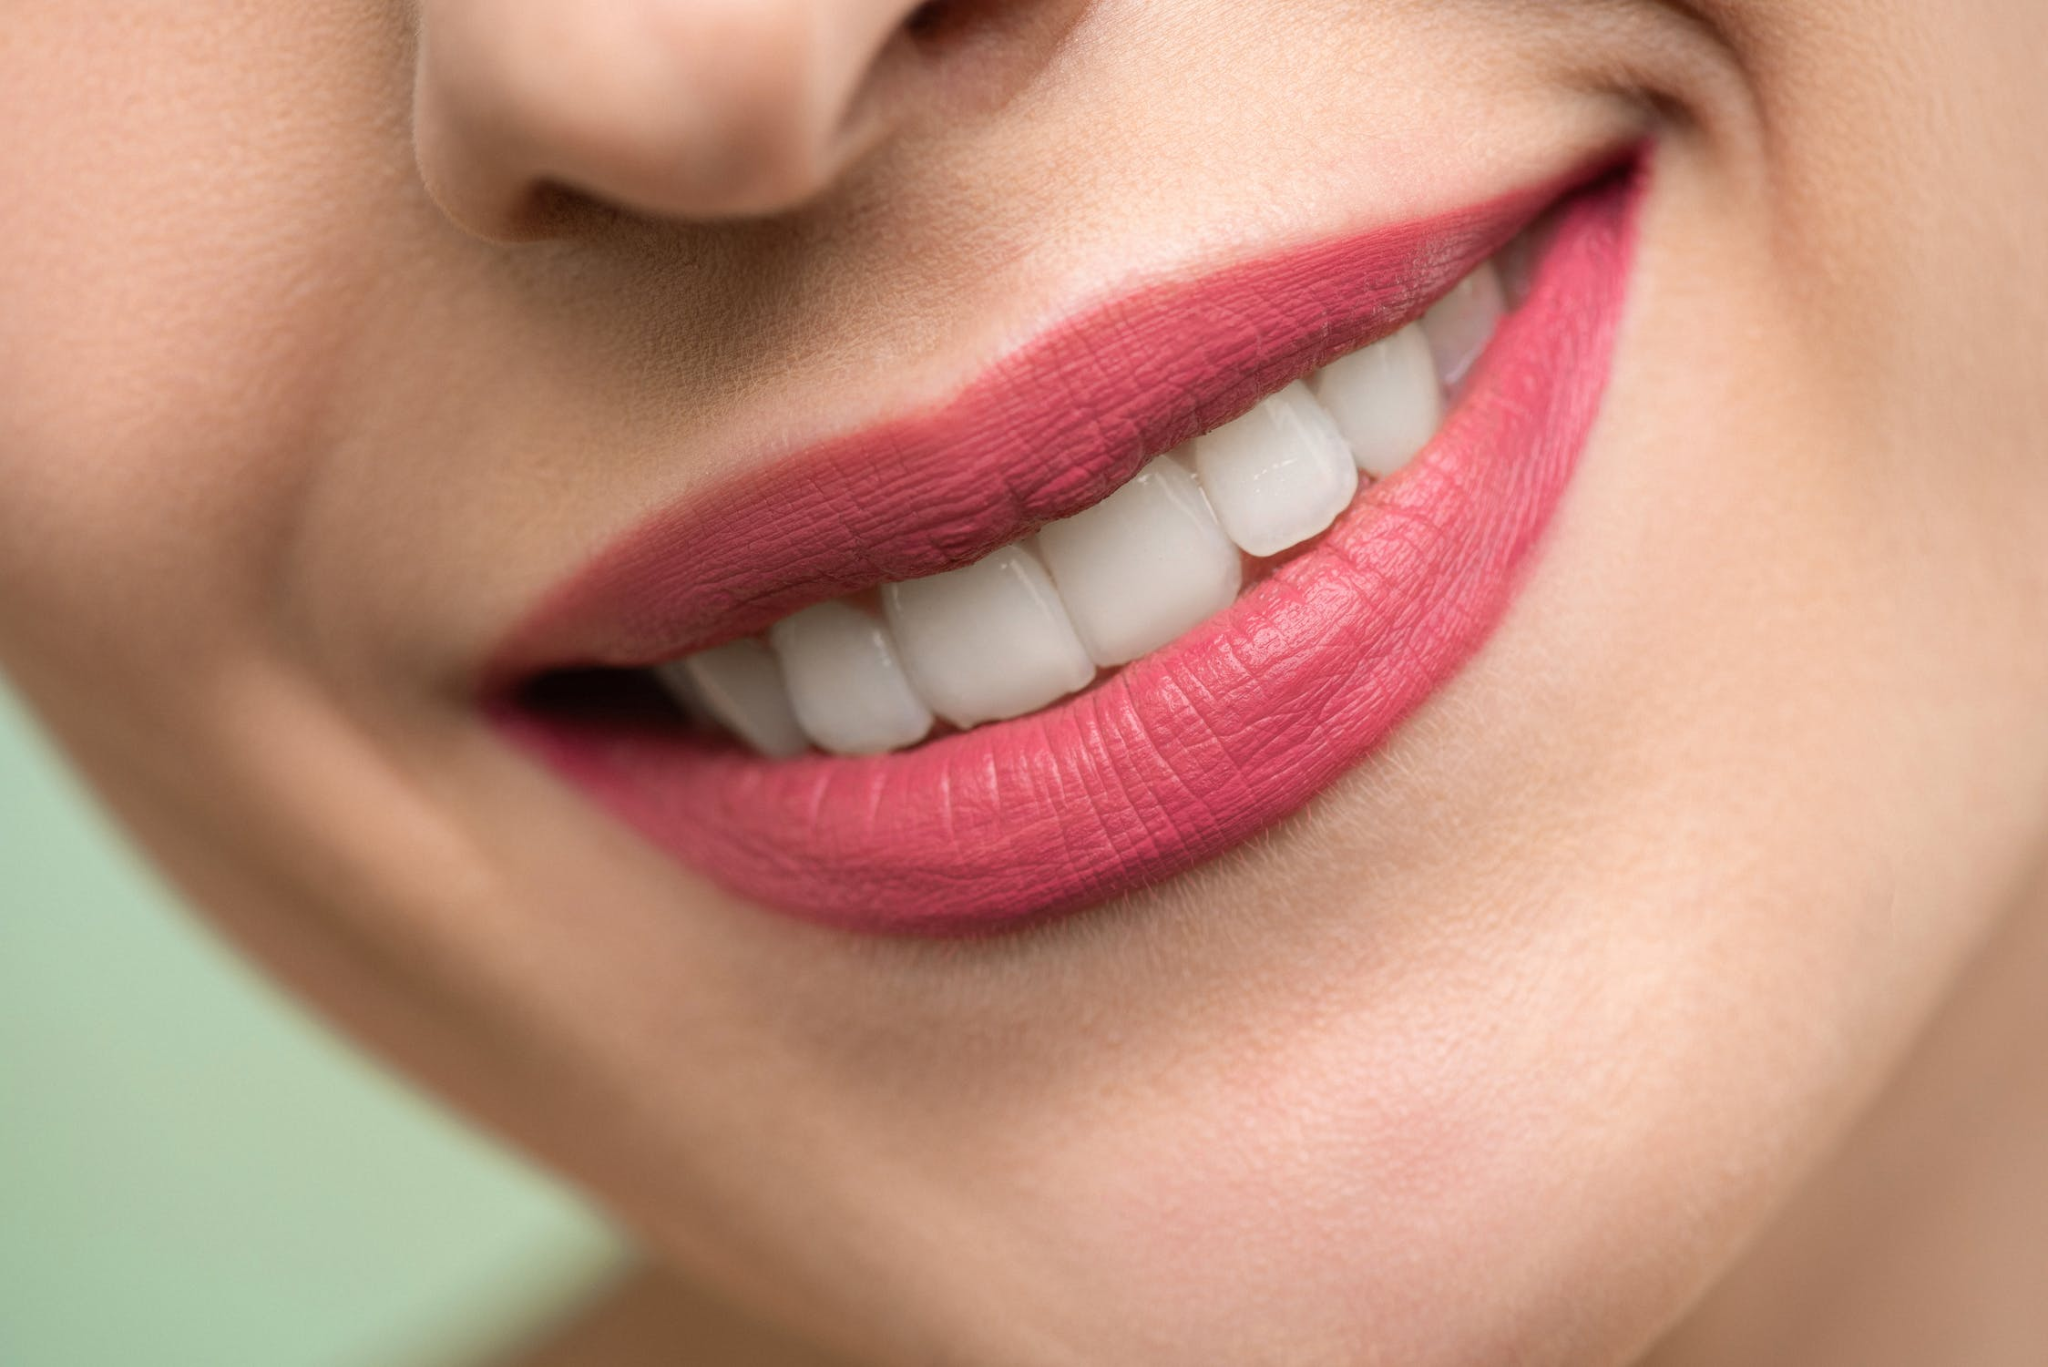 How an Oral Hygiene Service Benefits Your Smile